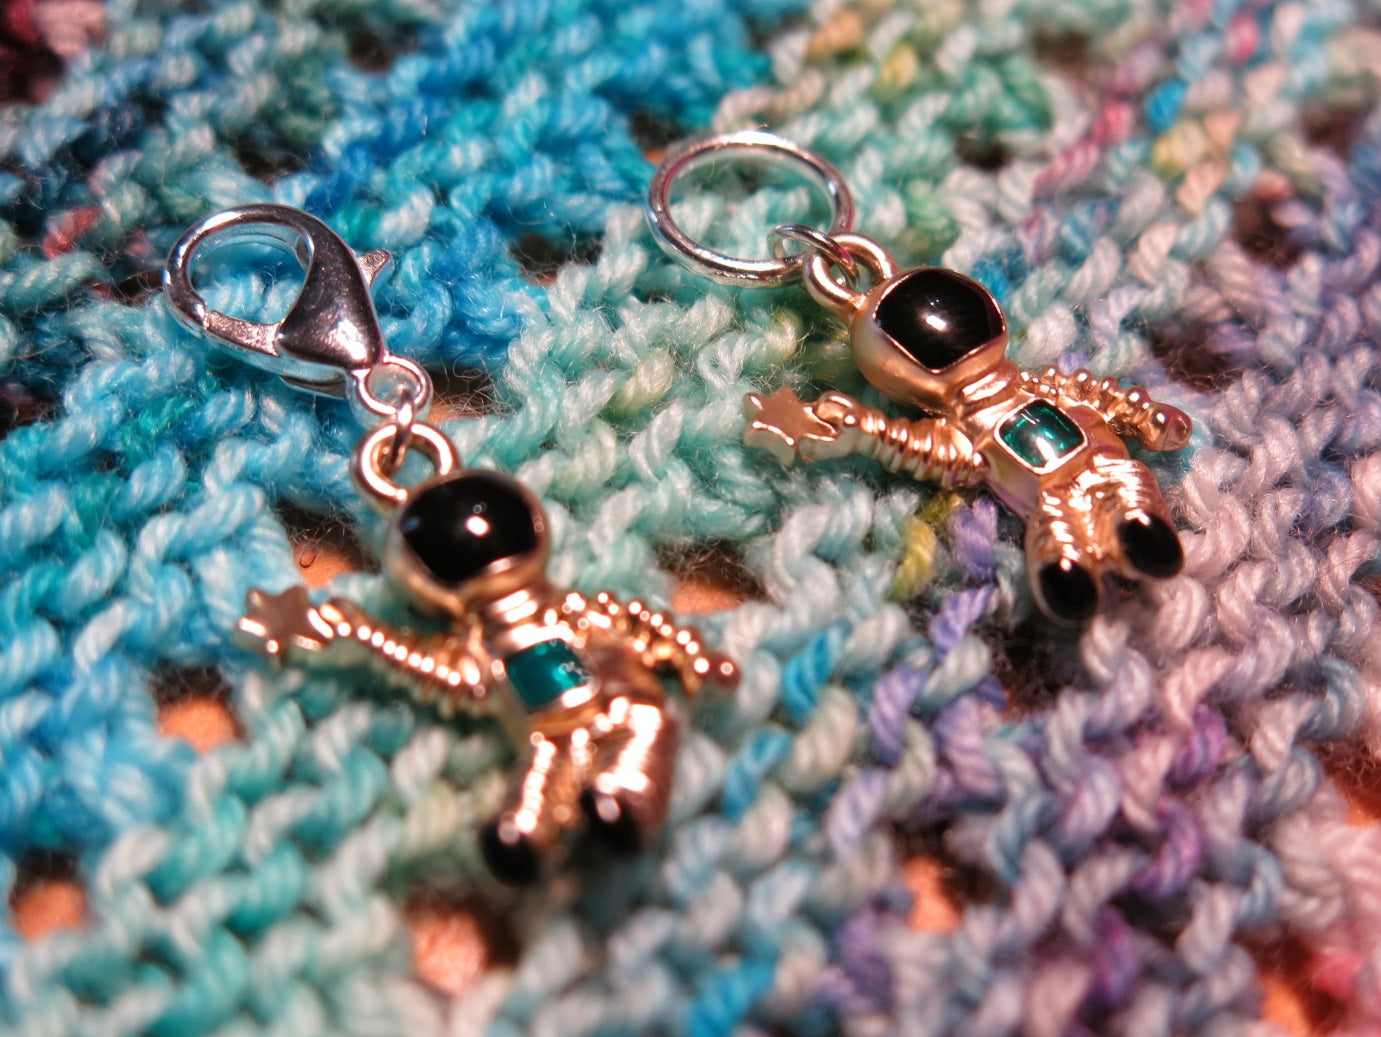 3d astronaught stitchmarkers on snagless rings or lobster clasps